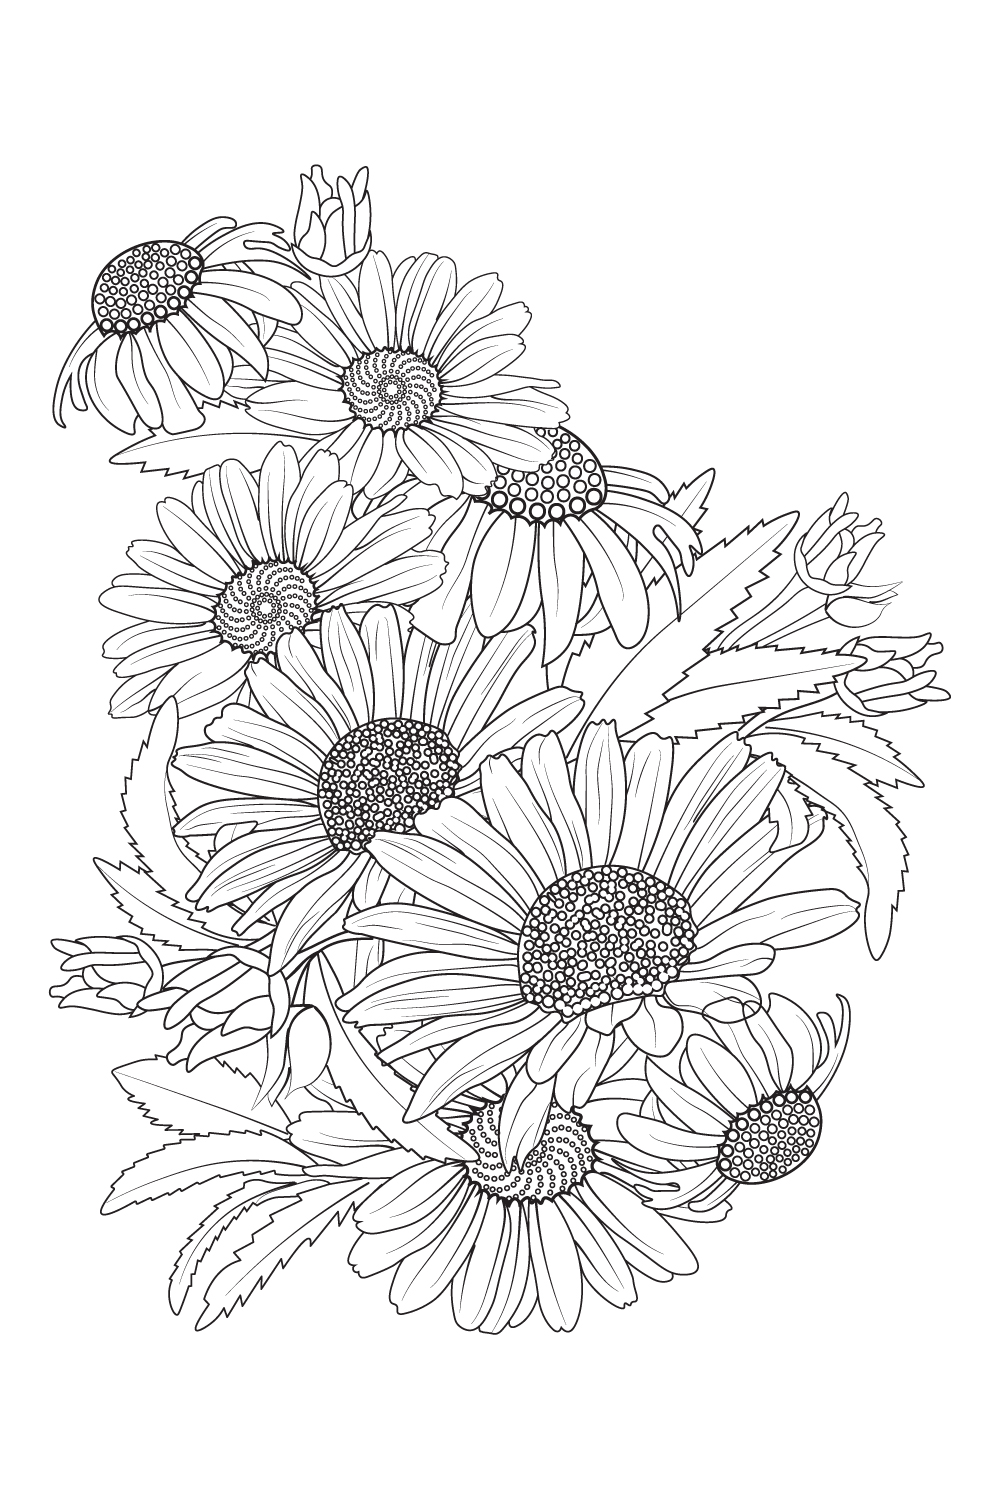 Daisy flower drawing realistic botanical daisy flower line art, gerbera daisy flower pencil art, pinterest preview image.